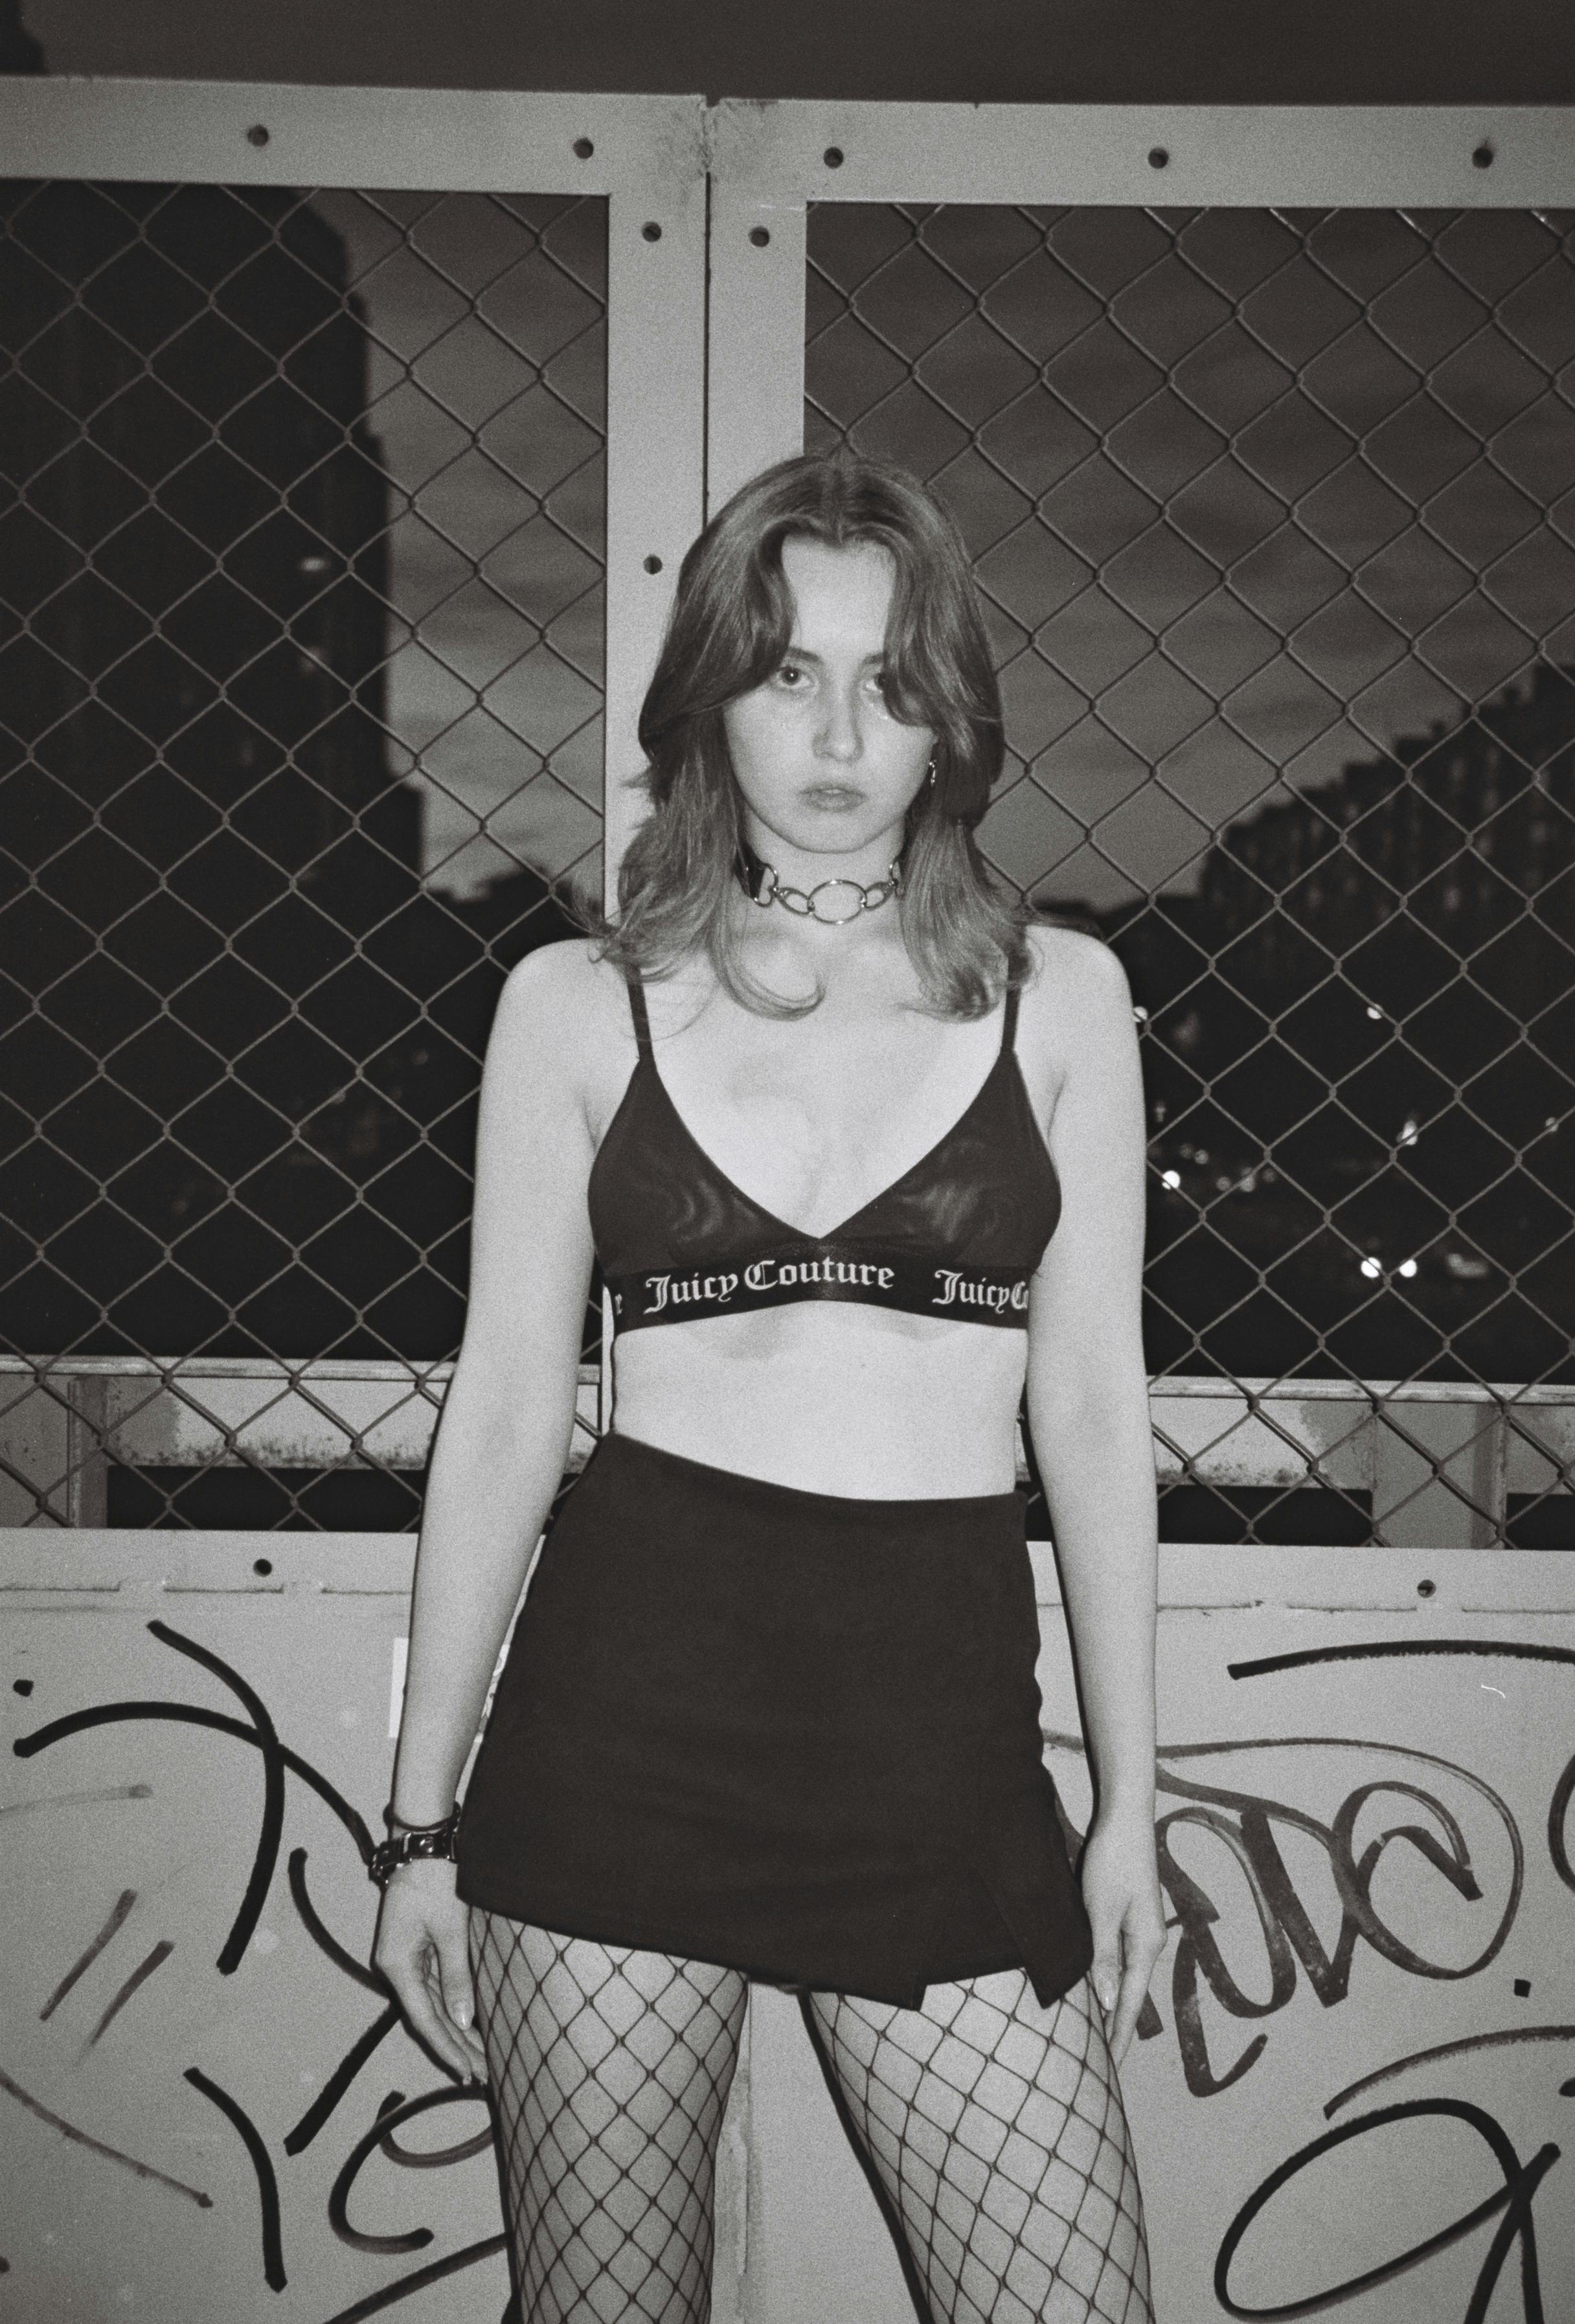 grayscale photography of a beautiful woman standing near metal chain link fence while seriously looking at the camera